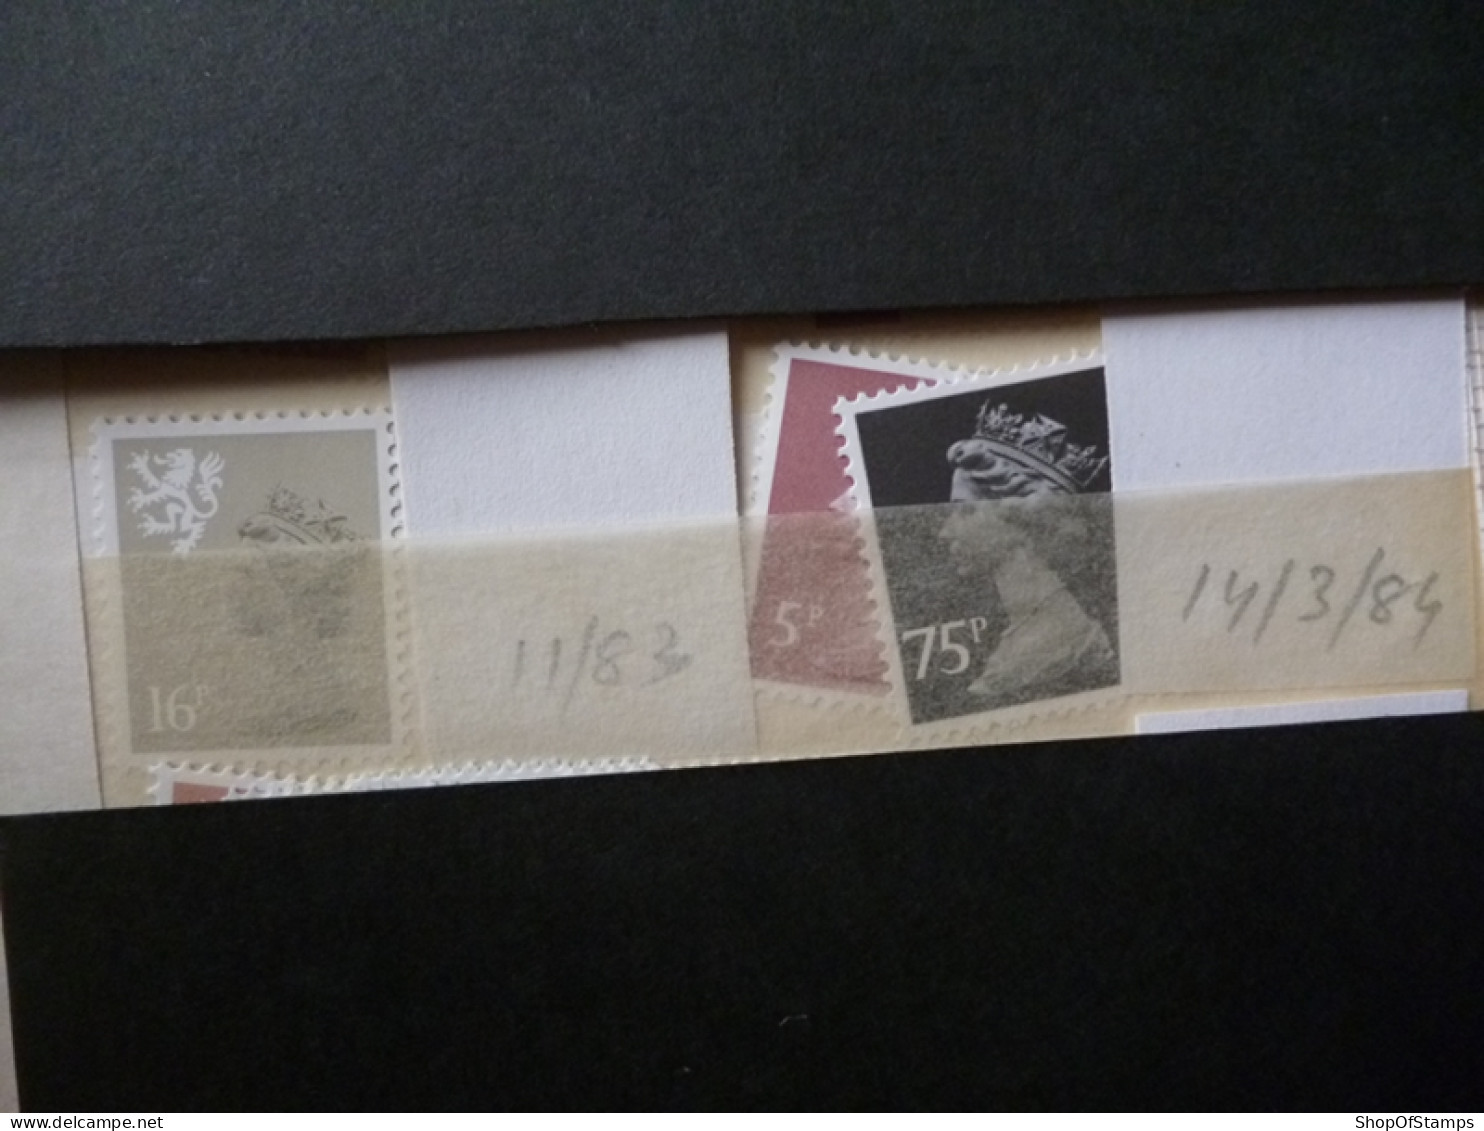 GREAT BRITAIN SG X 1983 & 1984 16p, 5p, 75p Only  MINT DEFI ISSUE FROM GPO IN ENVELOPE - Macchine Per Obliterare (EMA)